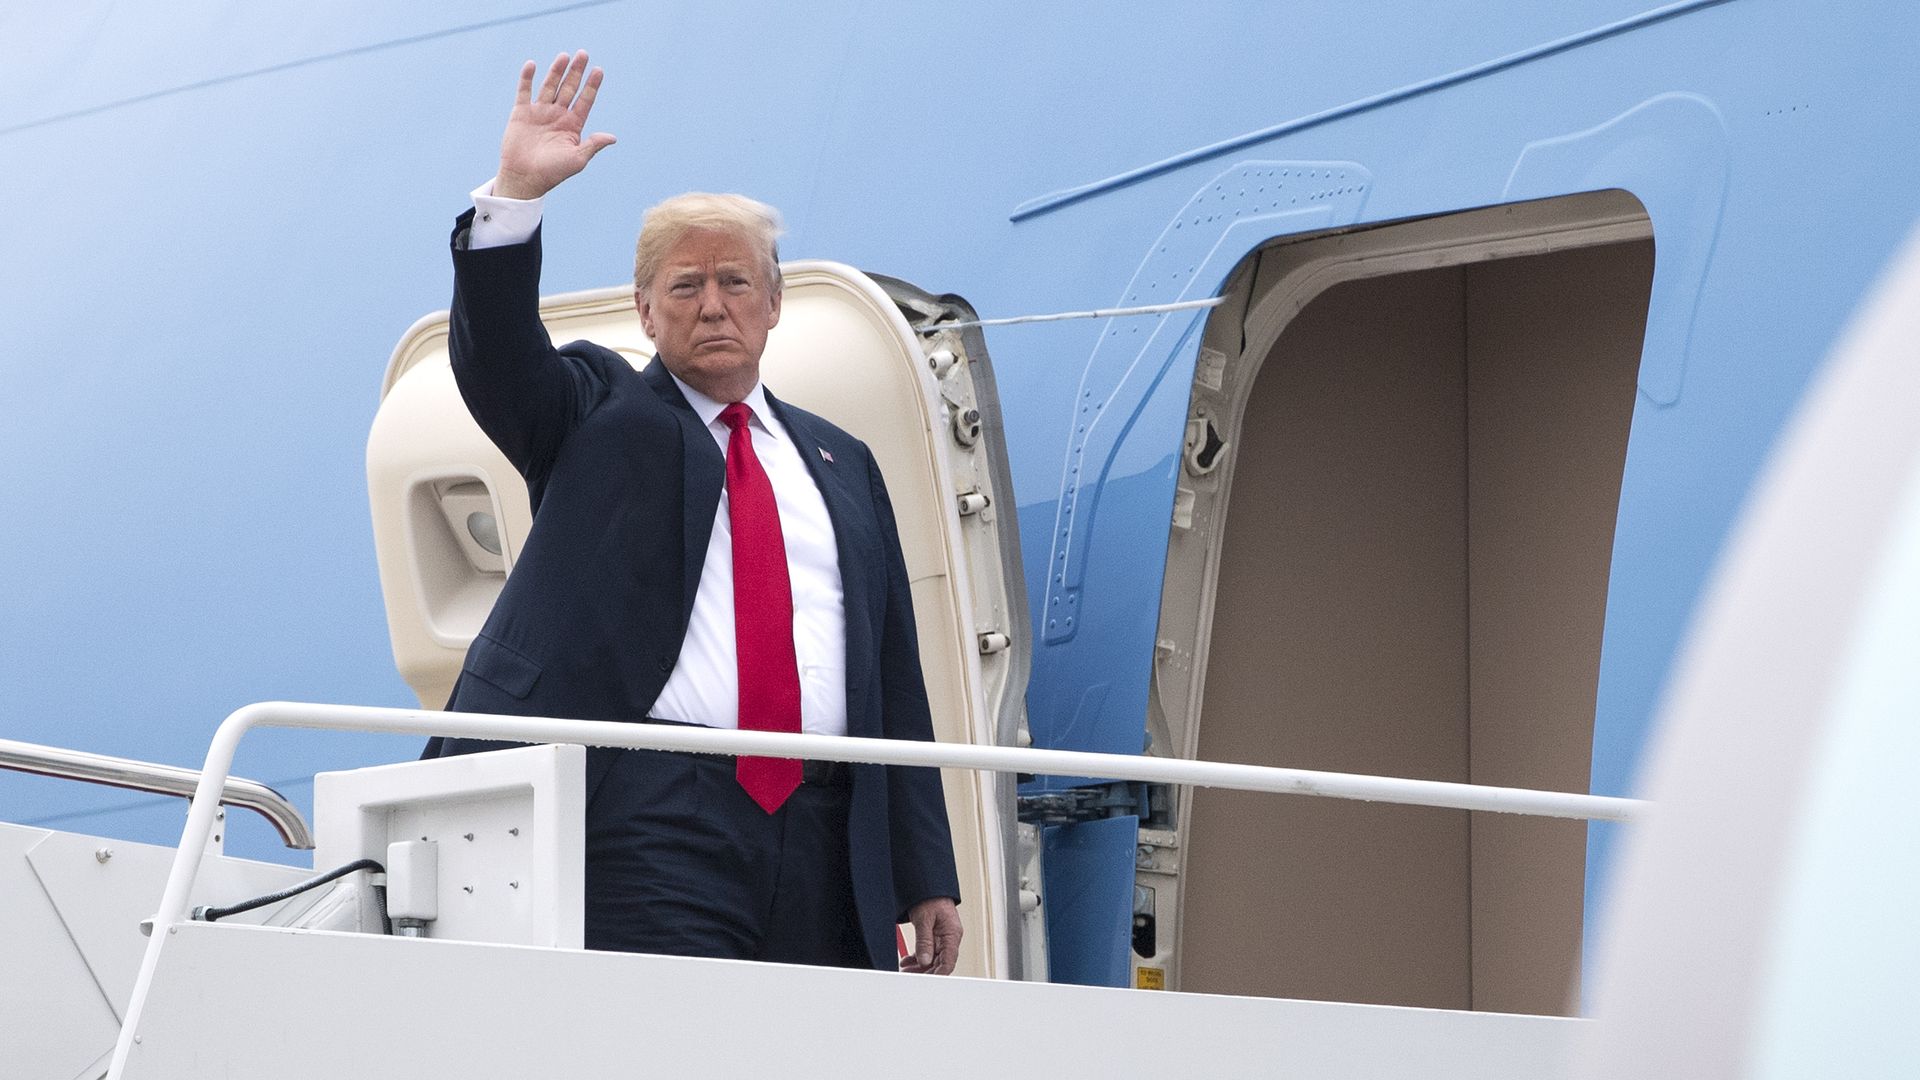 Donald Trump waving before boarding Air Force One